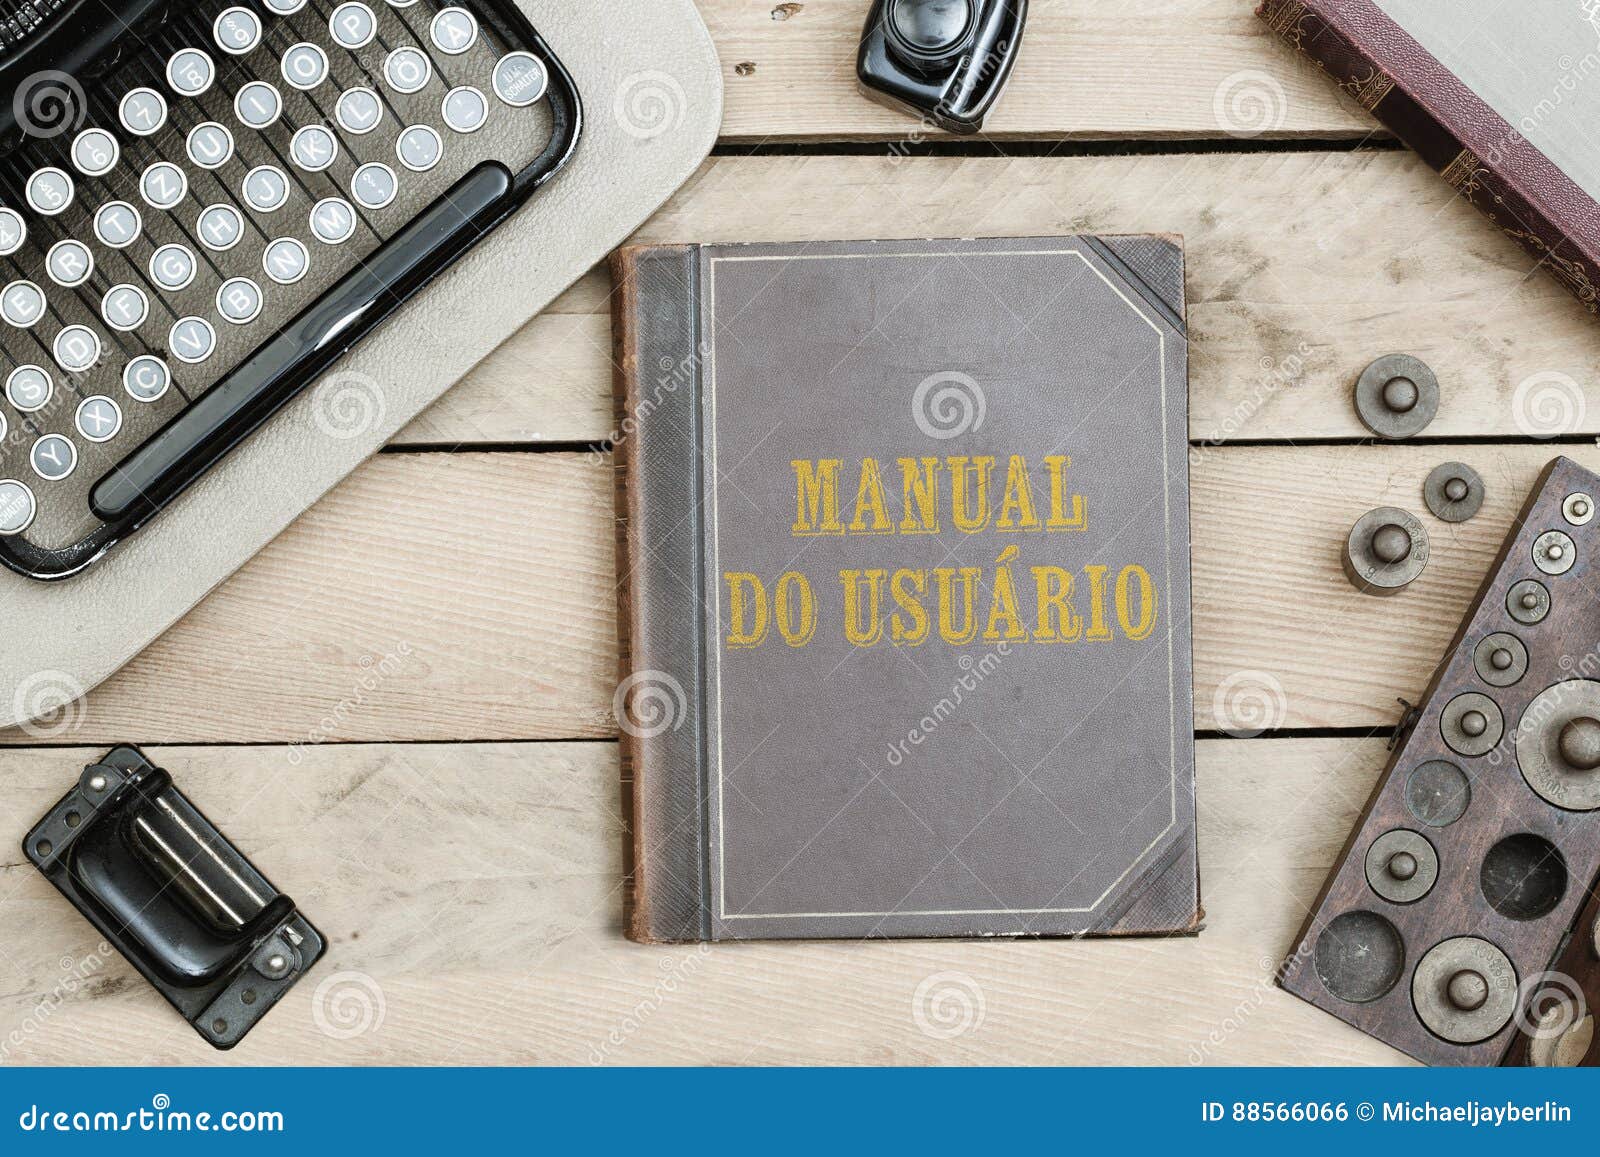 manual do usuario, portuguese text for user`s manual on old book